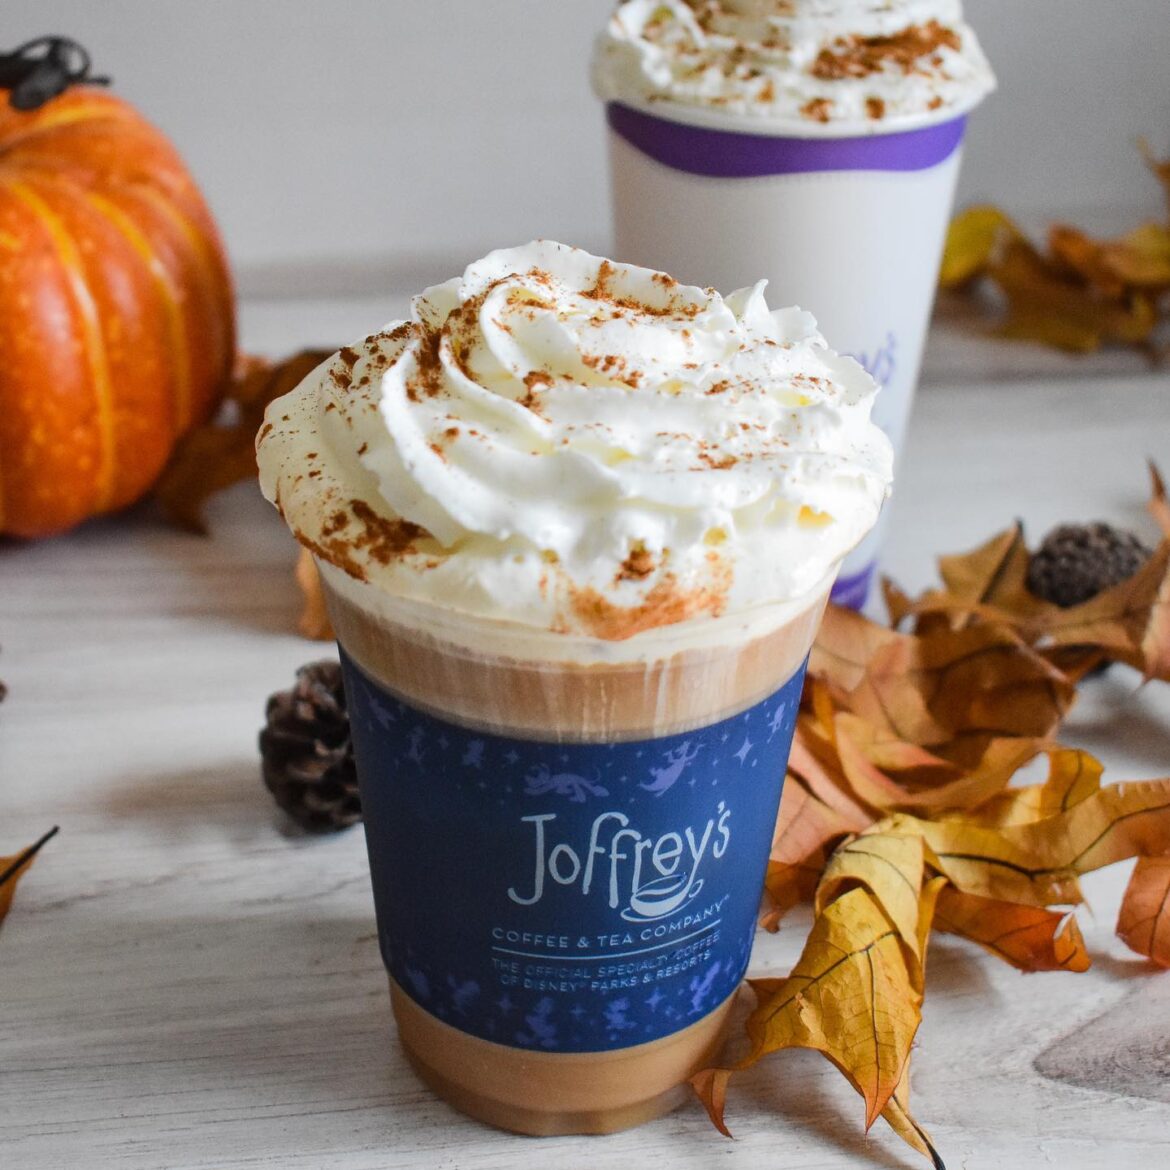 Fall Beverages are now available at Joffrey’s Coffee Location at Walt Disney World